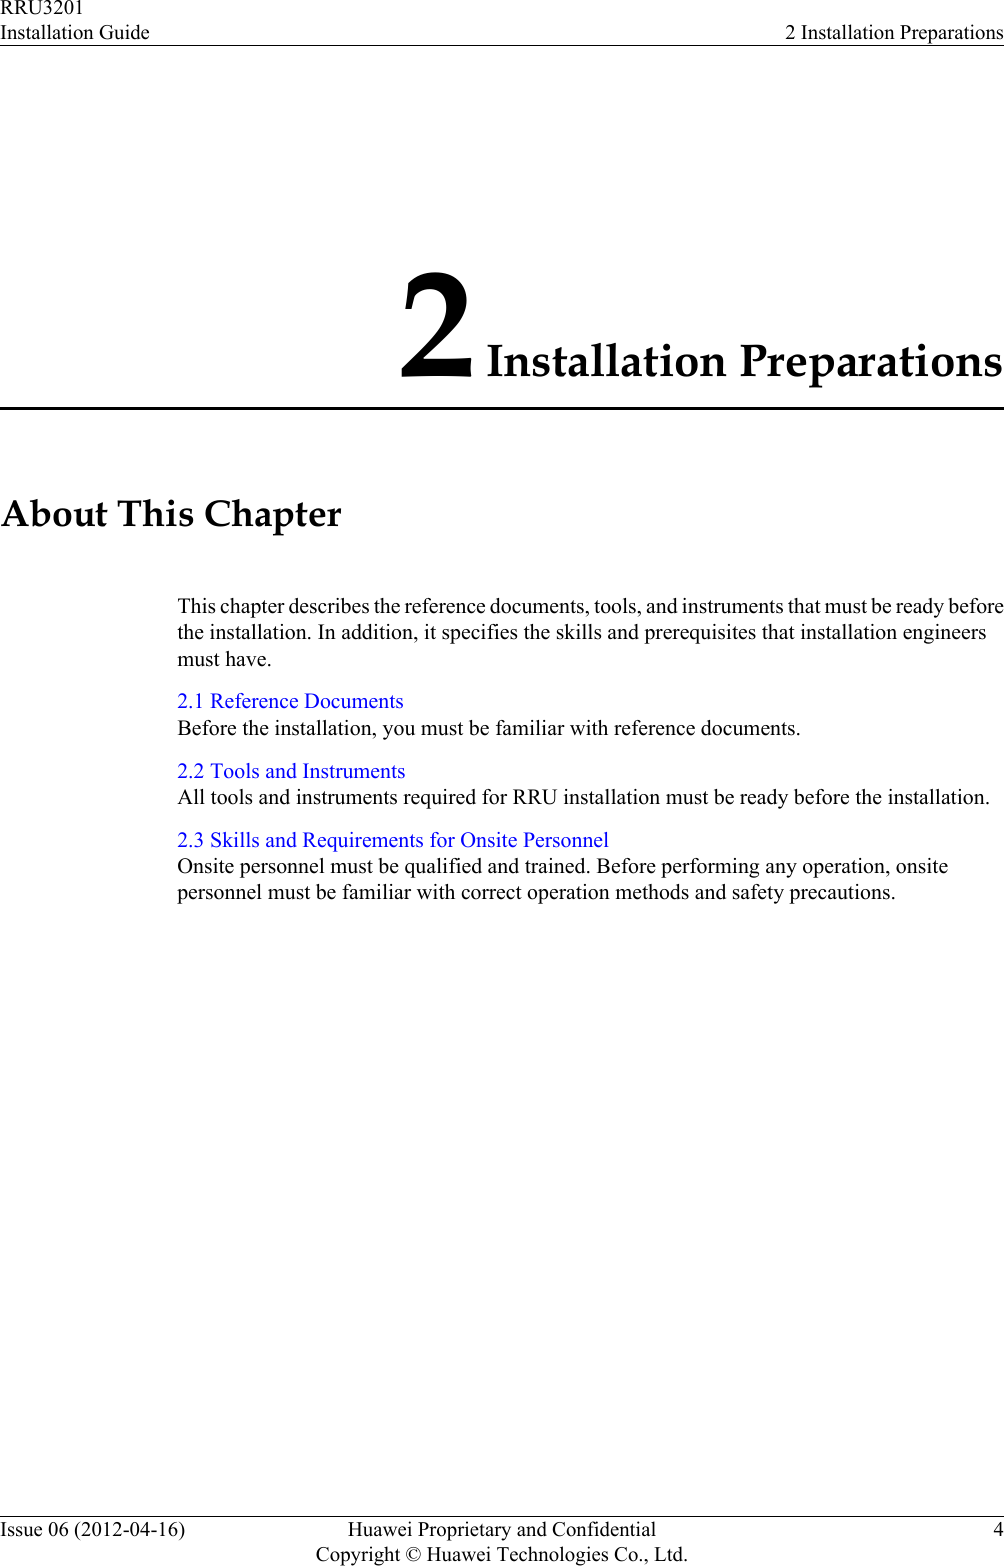 2 Installation PreparationsAbout This ChapterThis chapter describes the reference documents, tools, and instruments that must be ready beforethe installation. In addition, it specifies the skills and prerequisites that installation engineersmust have.2.1 Reference DocumentsBefore the installation, you must be familiar with reference documents.2.2 Tools and InstrumentsAll tools and instruments required for RRU installation must be ready before the installation.2.3 Skills and Requirements for Onsite PersonnelOnsite personnel must be qualified and trained. Before performing any operation, onsitepersonnel must be familiar with correct operation methods and safety precautions.RRU3201Installation Guide 2 Installation PreparationsIssue 06 (2012-04-16) Huawei Proprietary and ConfidentialCopyright © Huawei Technologies Co., Ltd.4